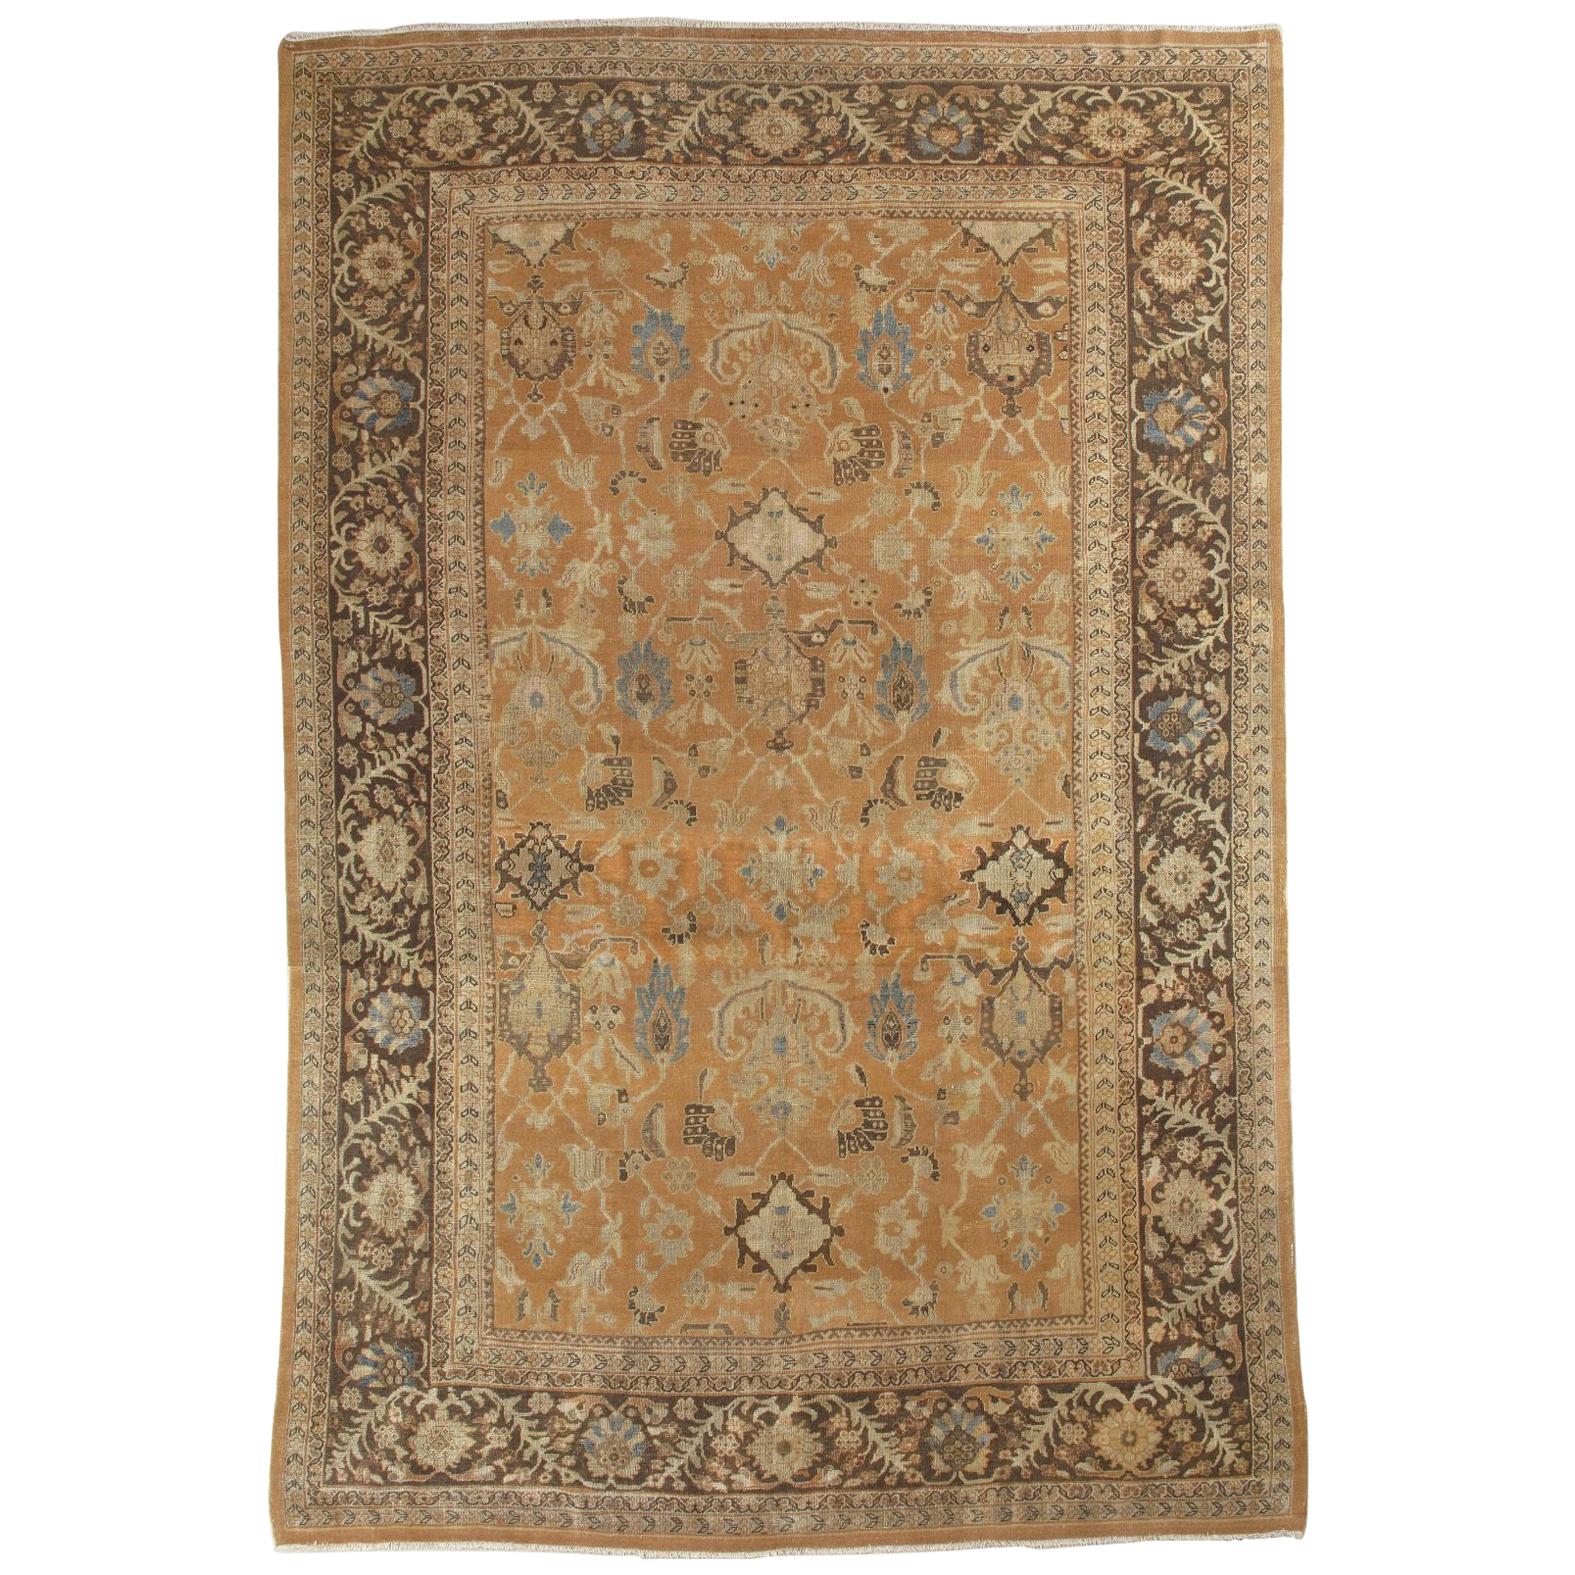 Antique Persian Sultanabad Carpet, Handmade Oriental Rug, Brown, Peach Soft Blue For Sale